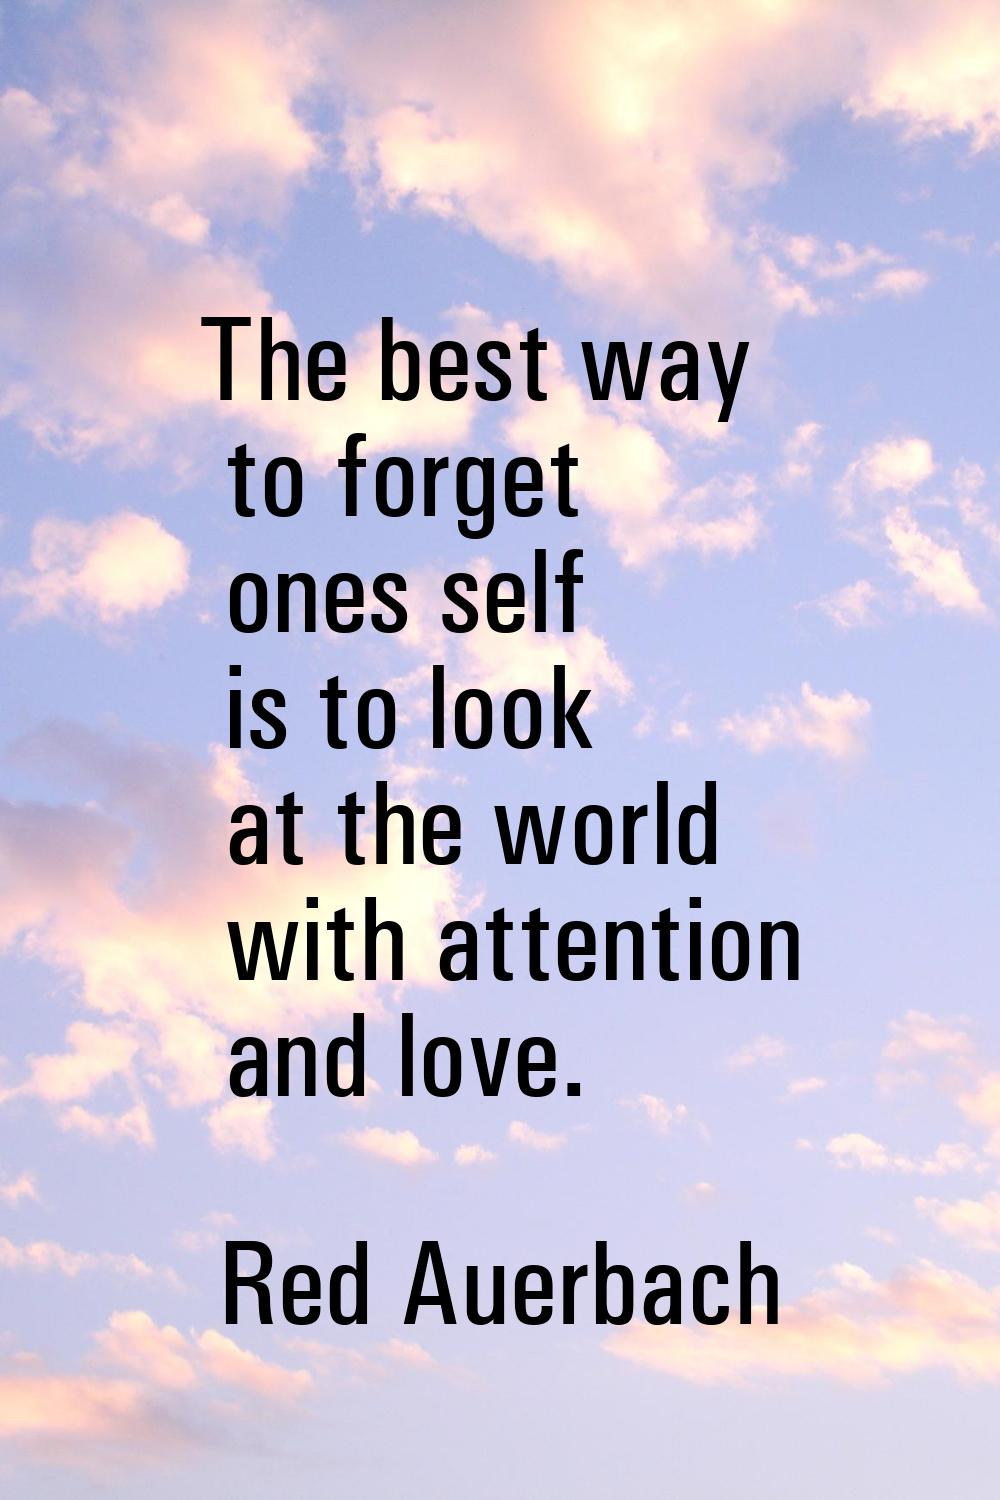 The best way to forget ones self is to look at the world with attention and love.